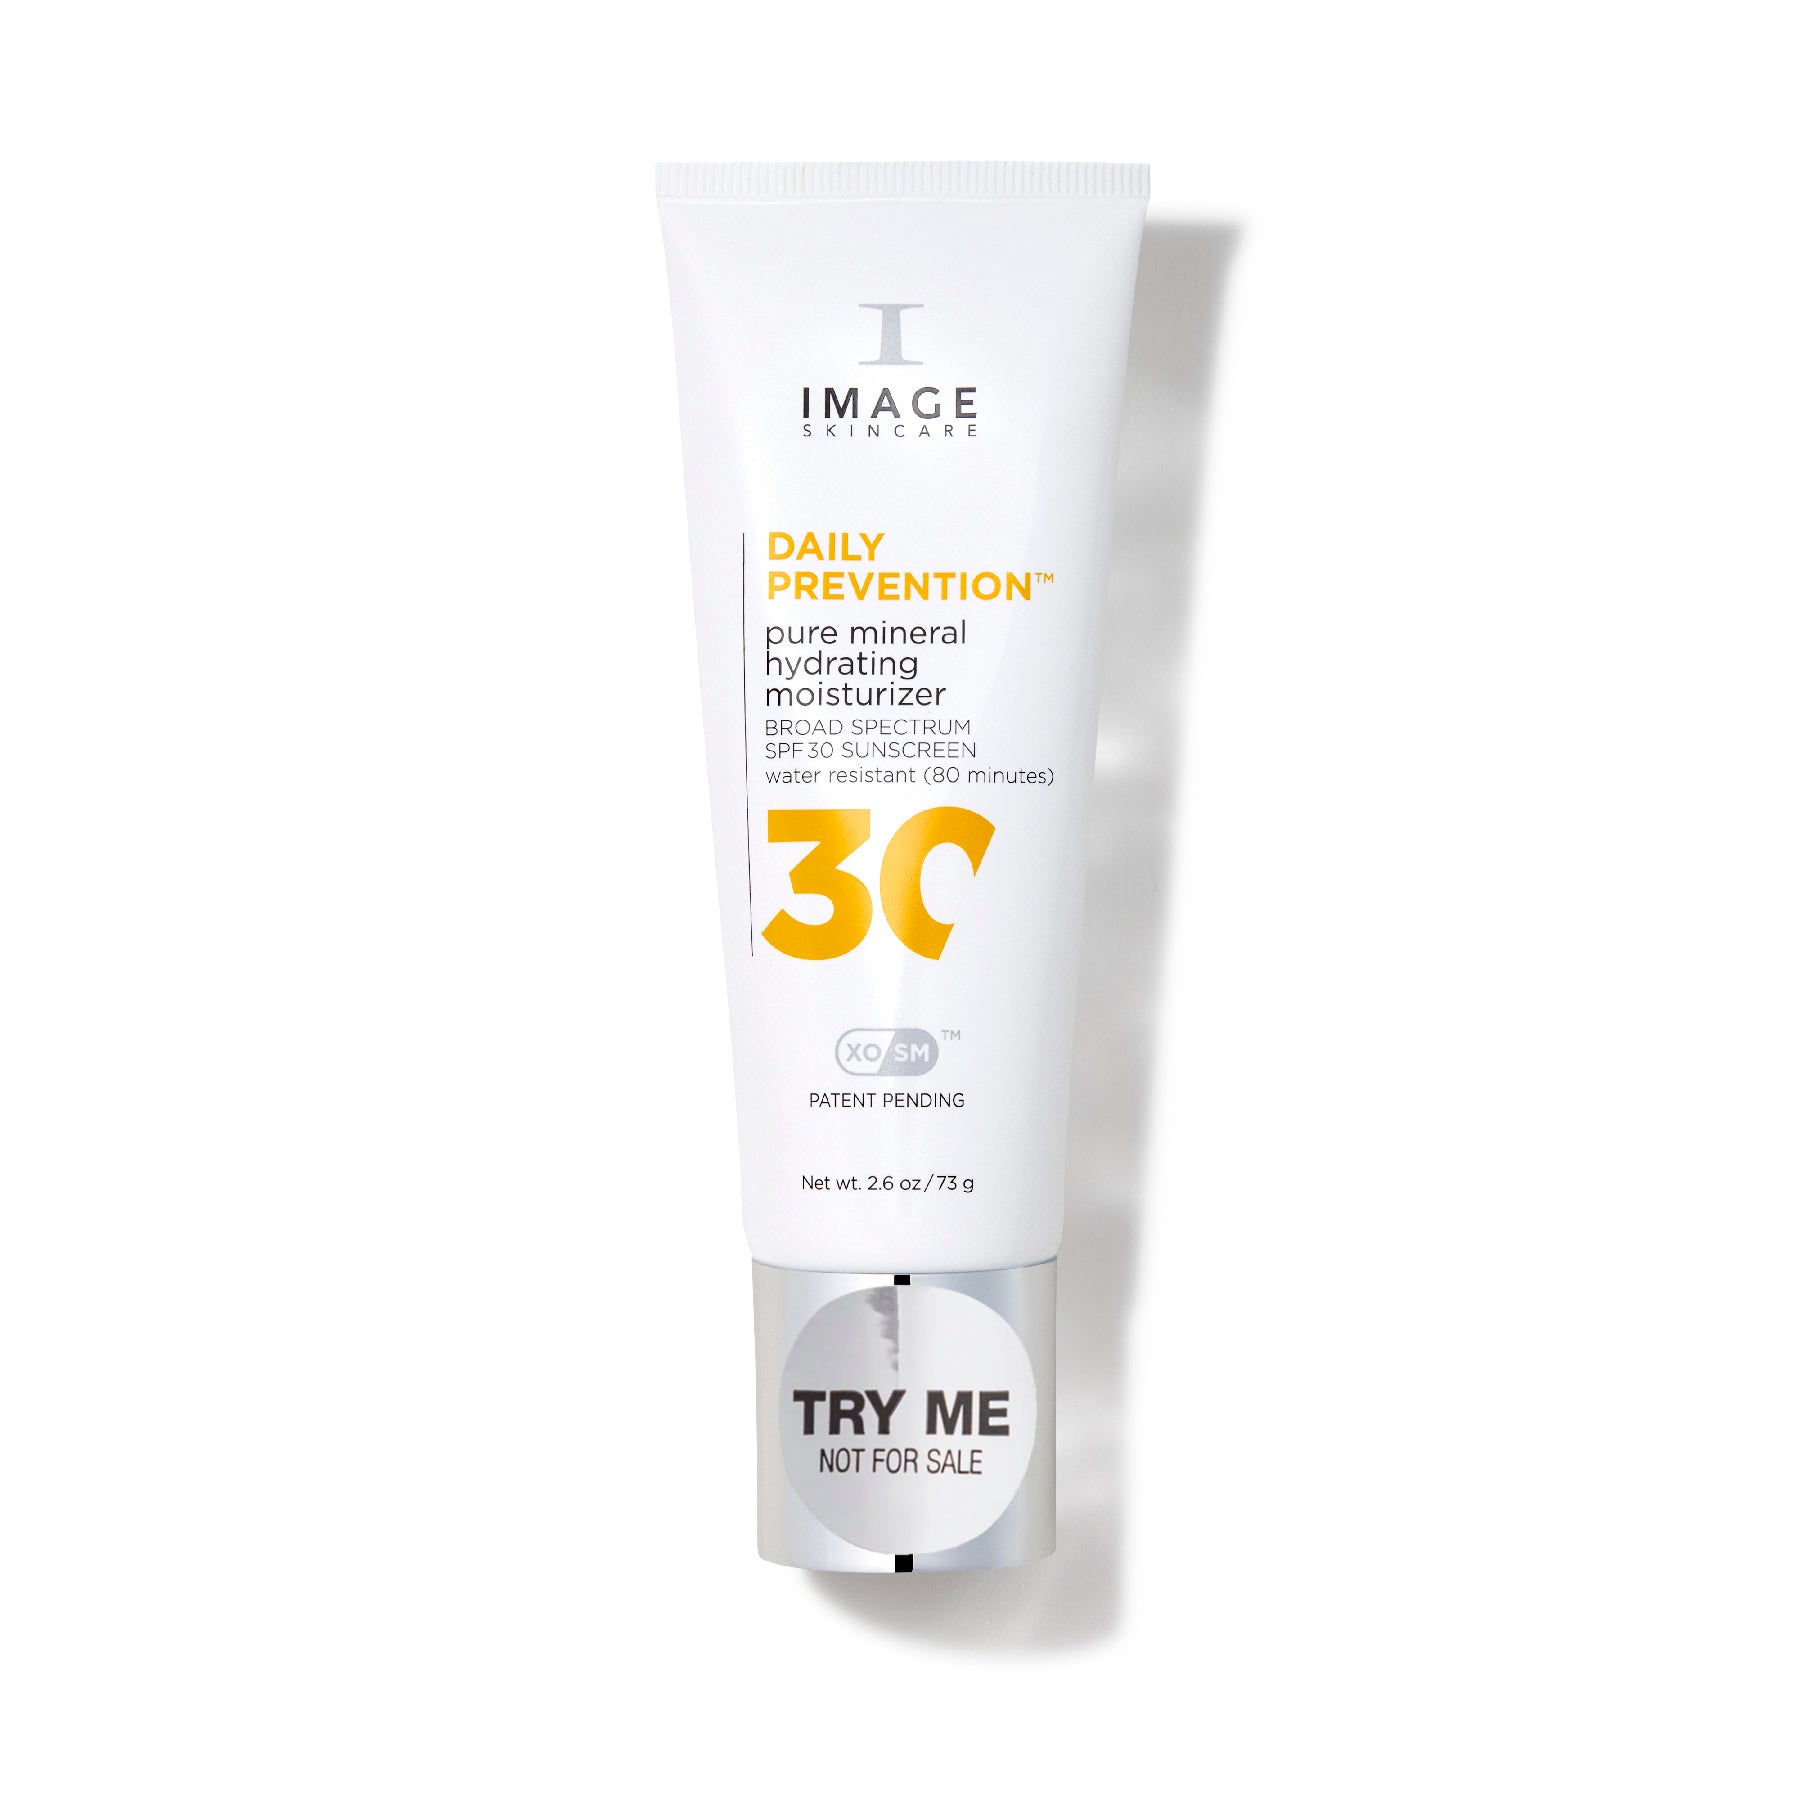 DAILY PREVENTION™ tester pure mineral hydrating moisturizer SPF 30